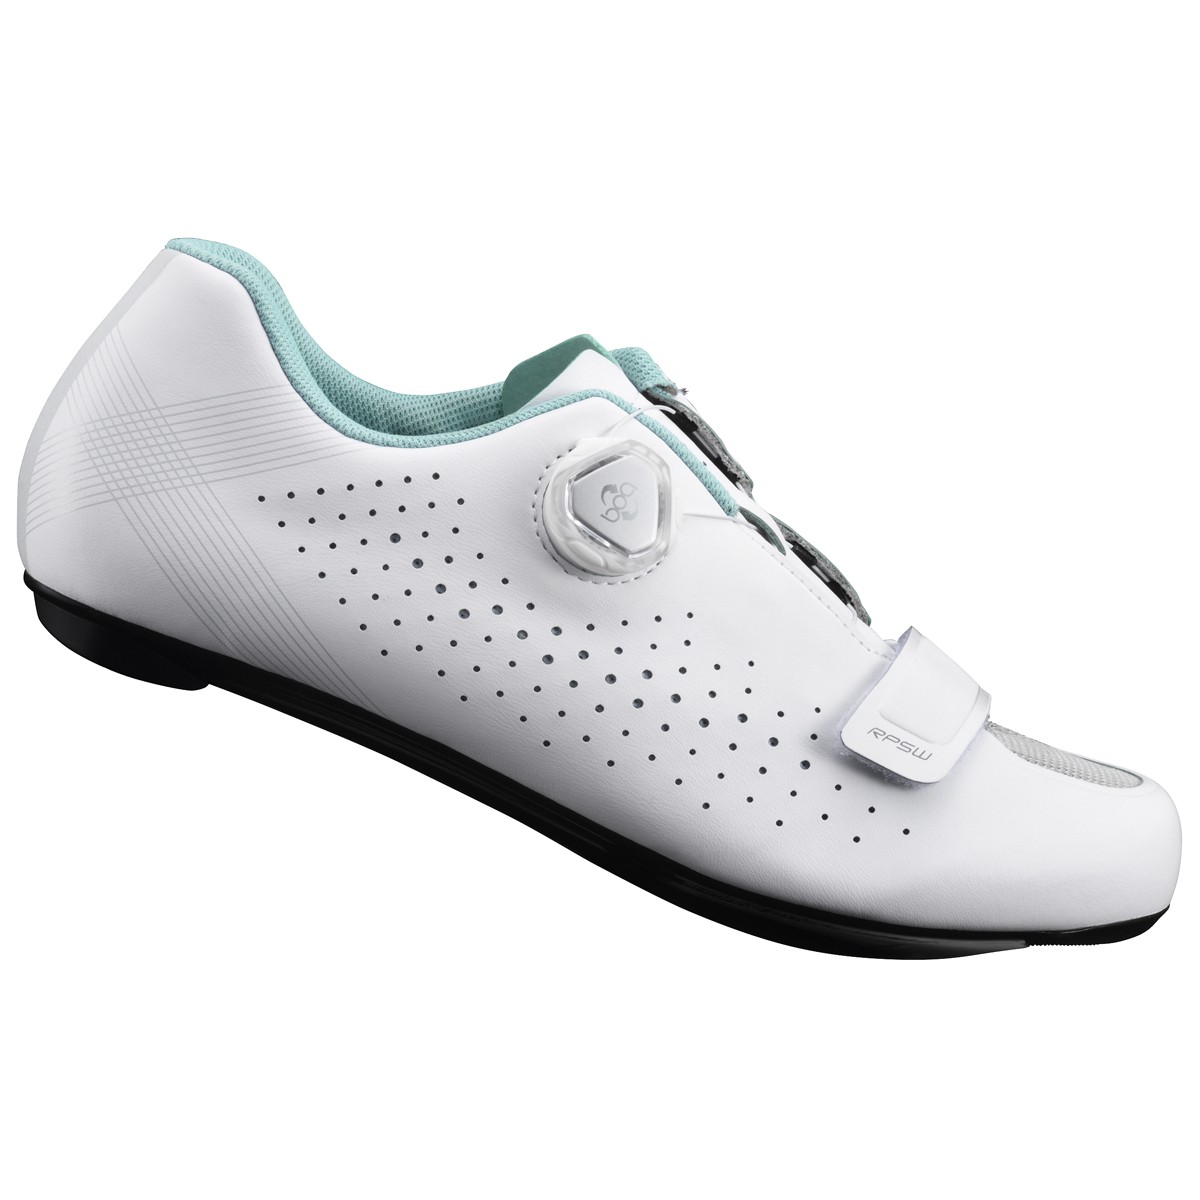 Shimano rp501 femme chaussures route blanc